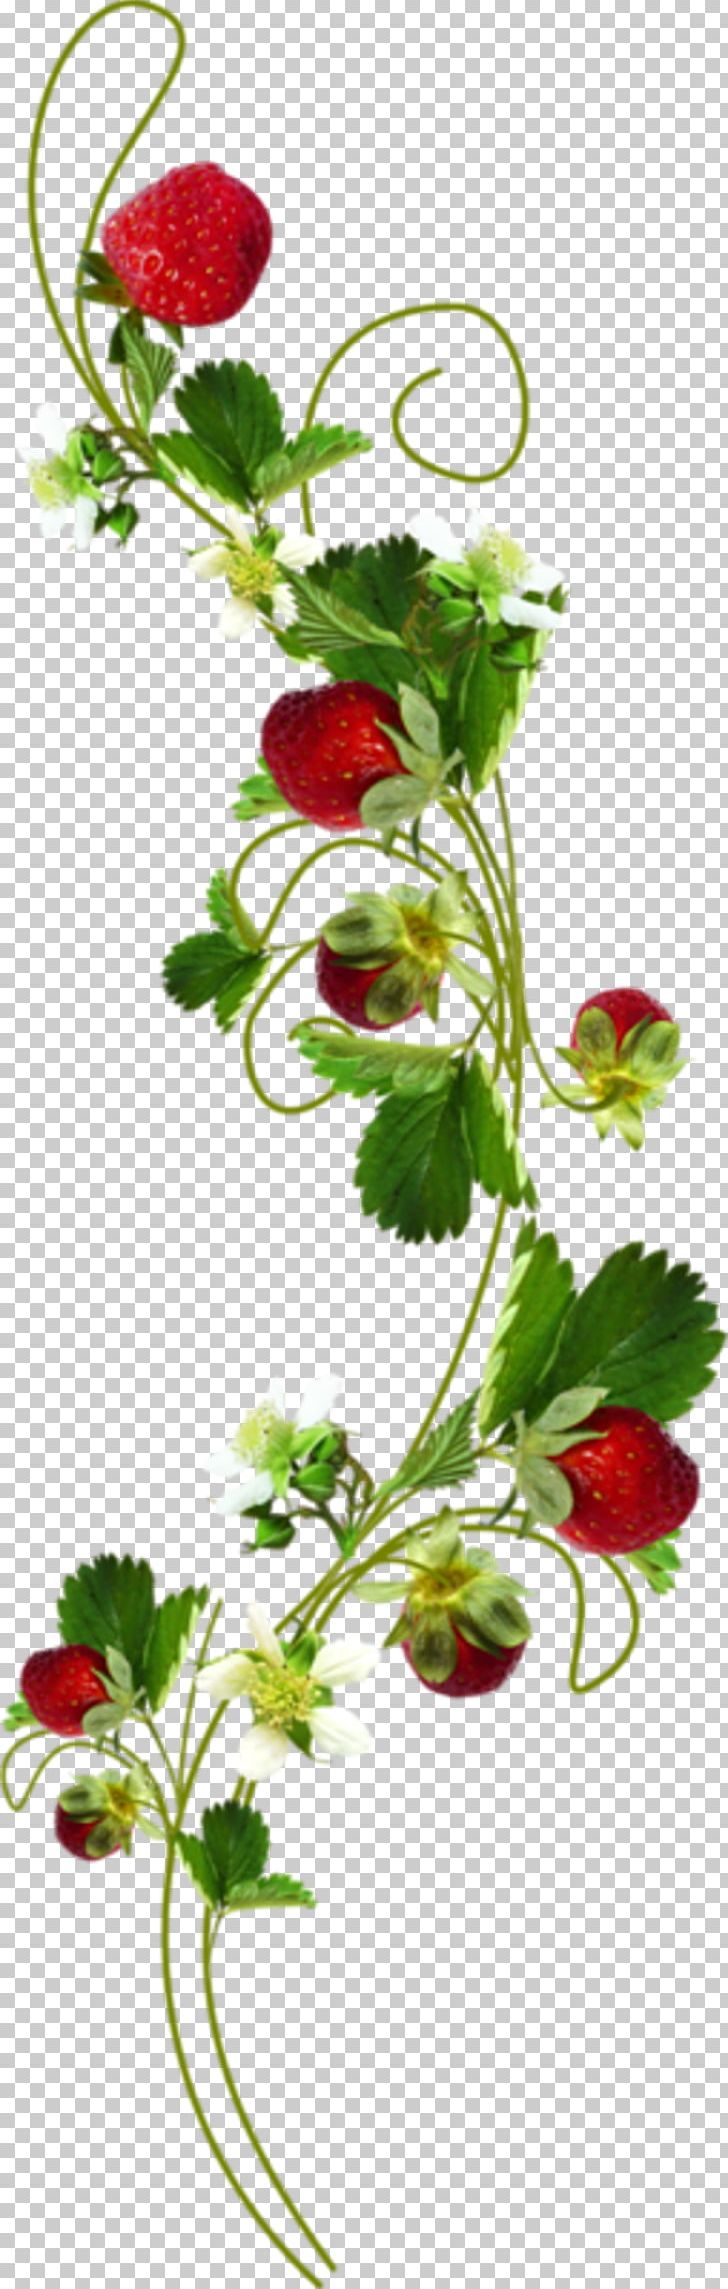 Strawberry PNG, Clipart, Amorodo, Centerblog, Cut Flowers, Flora, Floral Design Free PNG Download